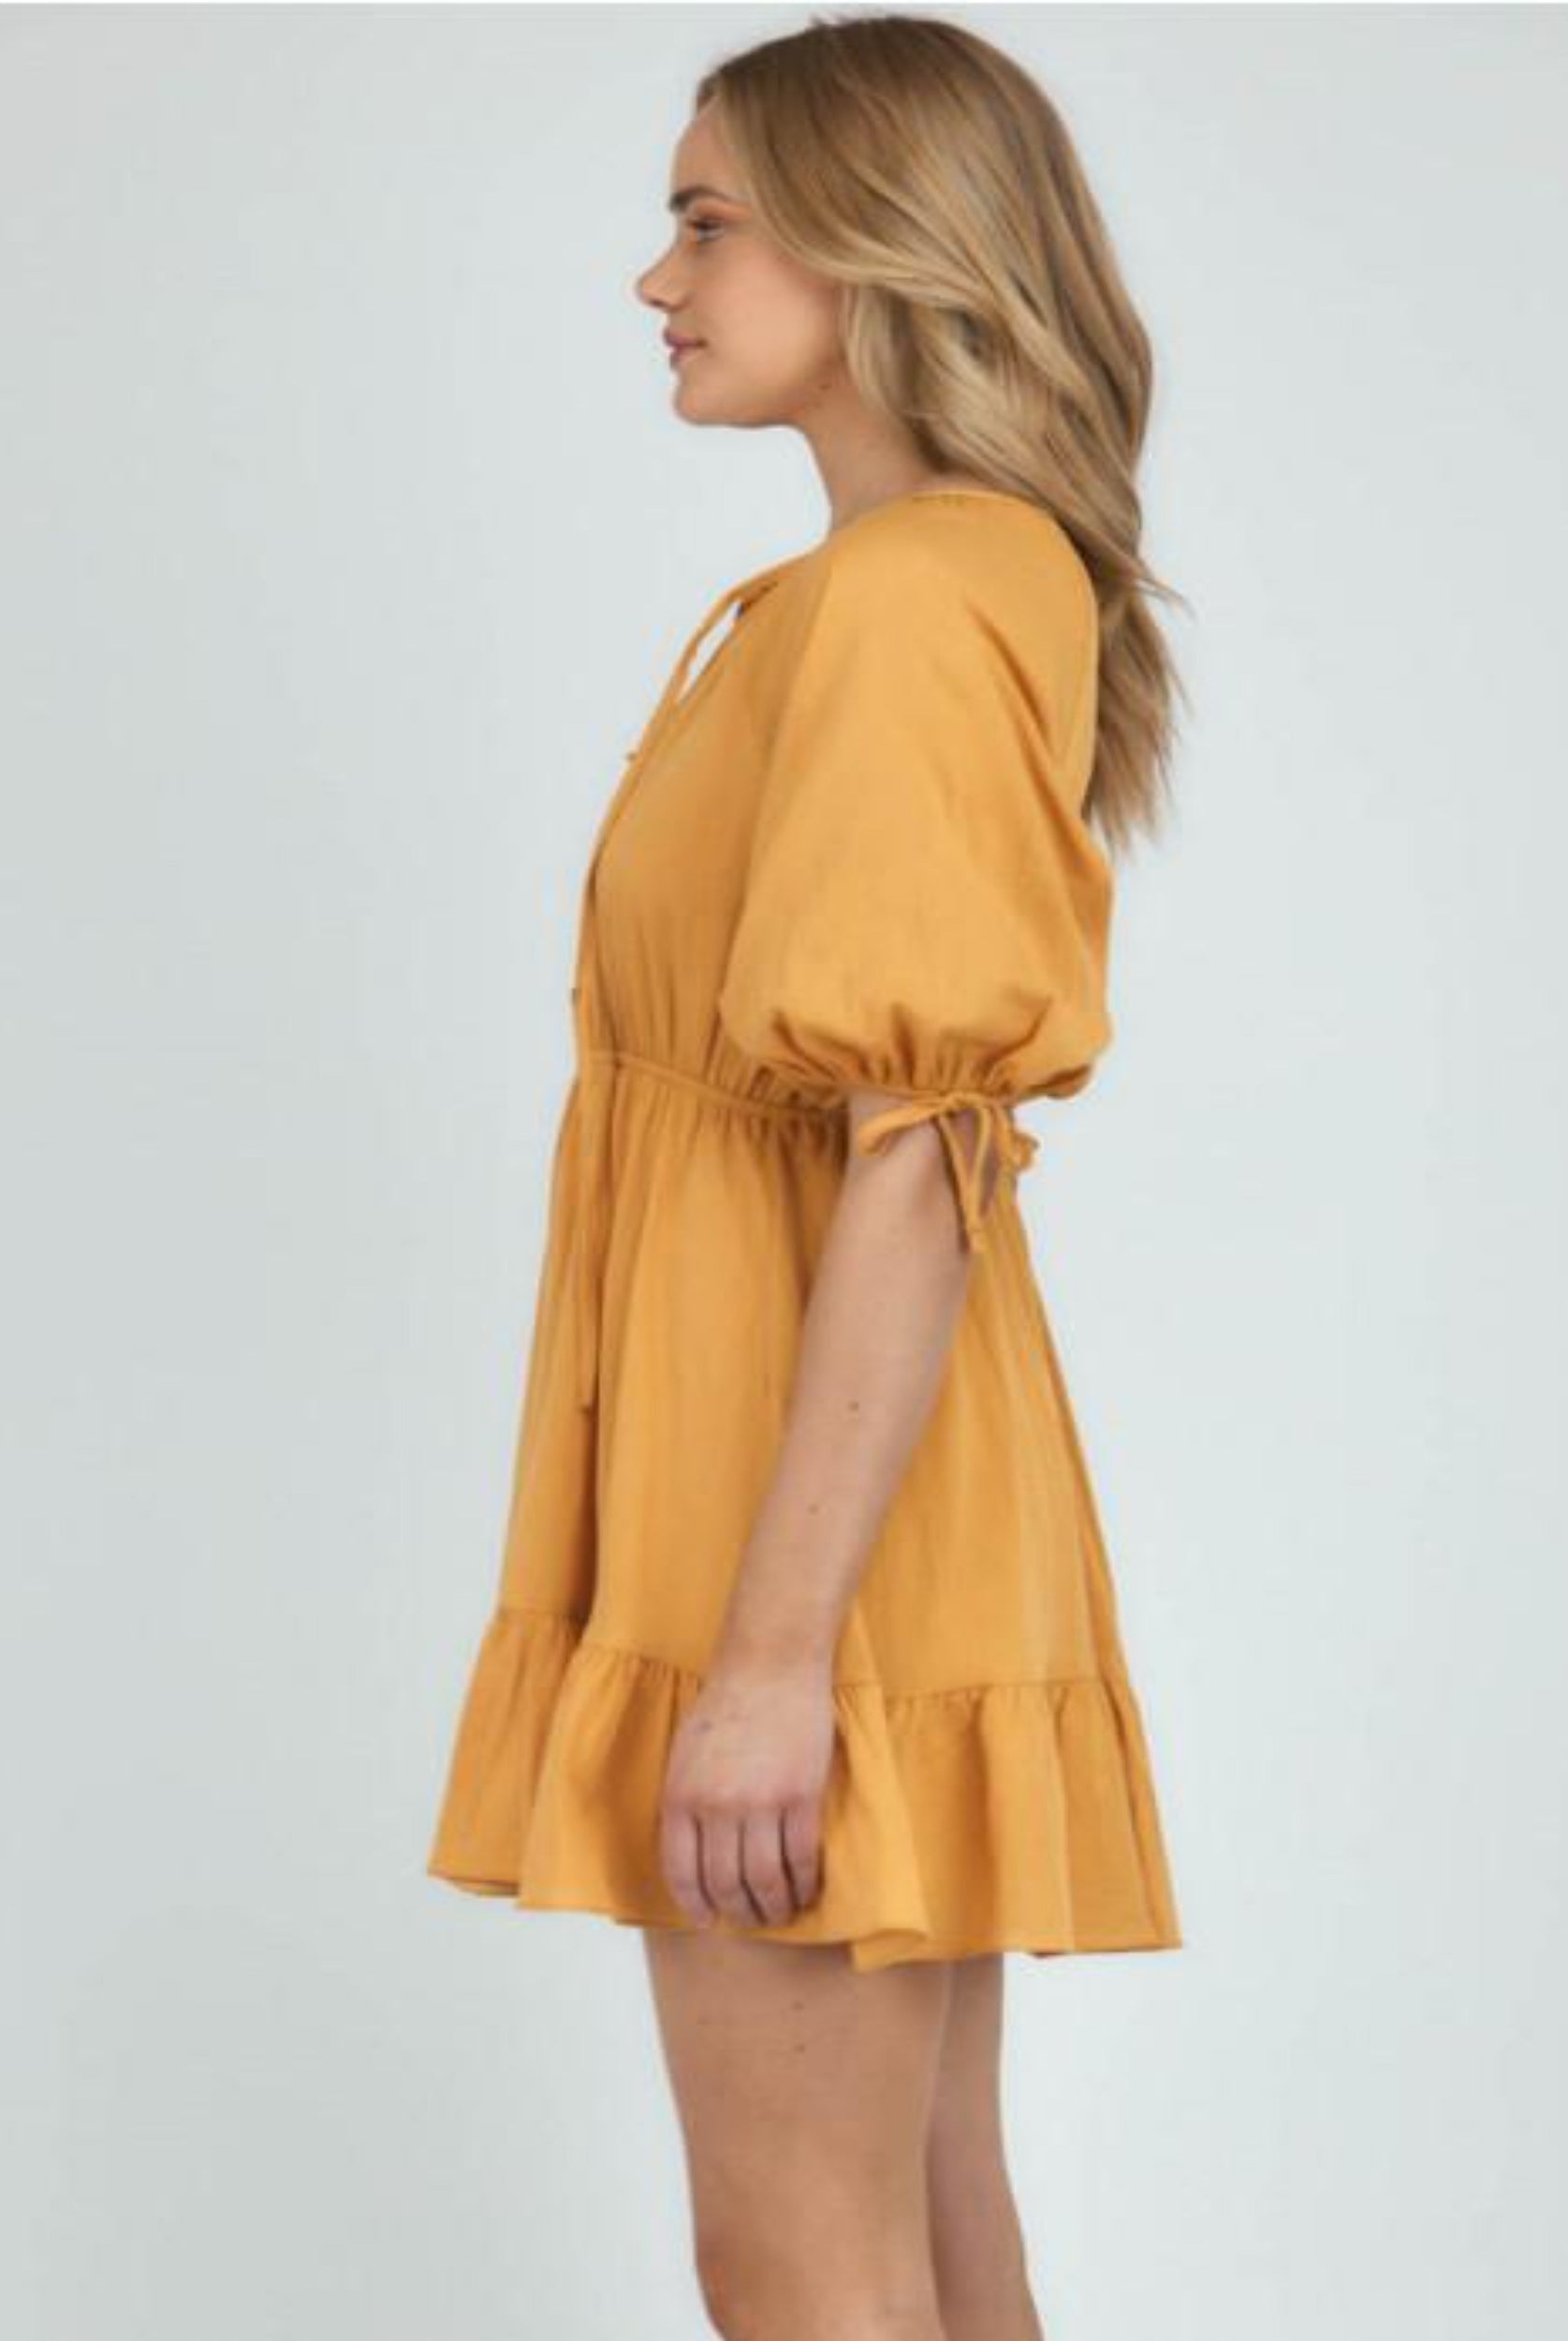 Blonde woman wearing yellow a line dress shot from side